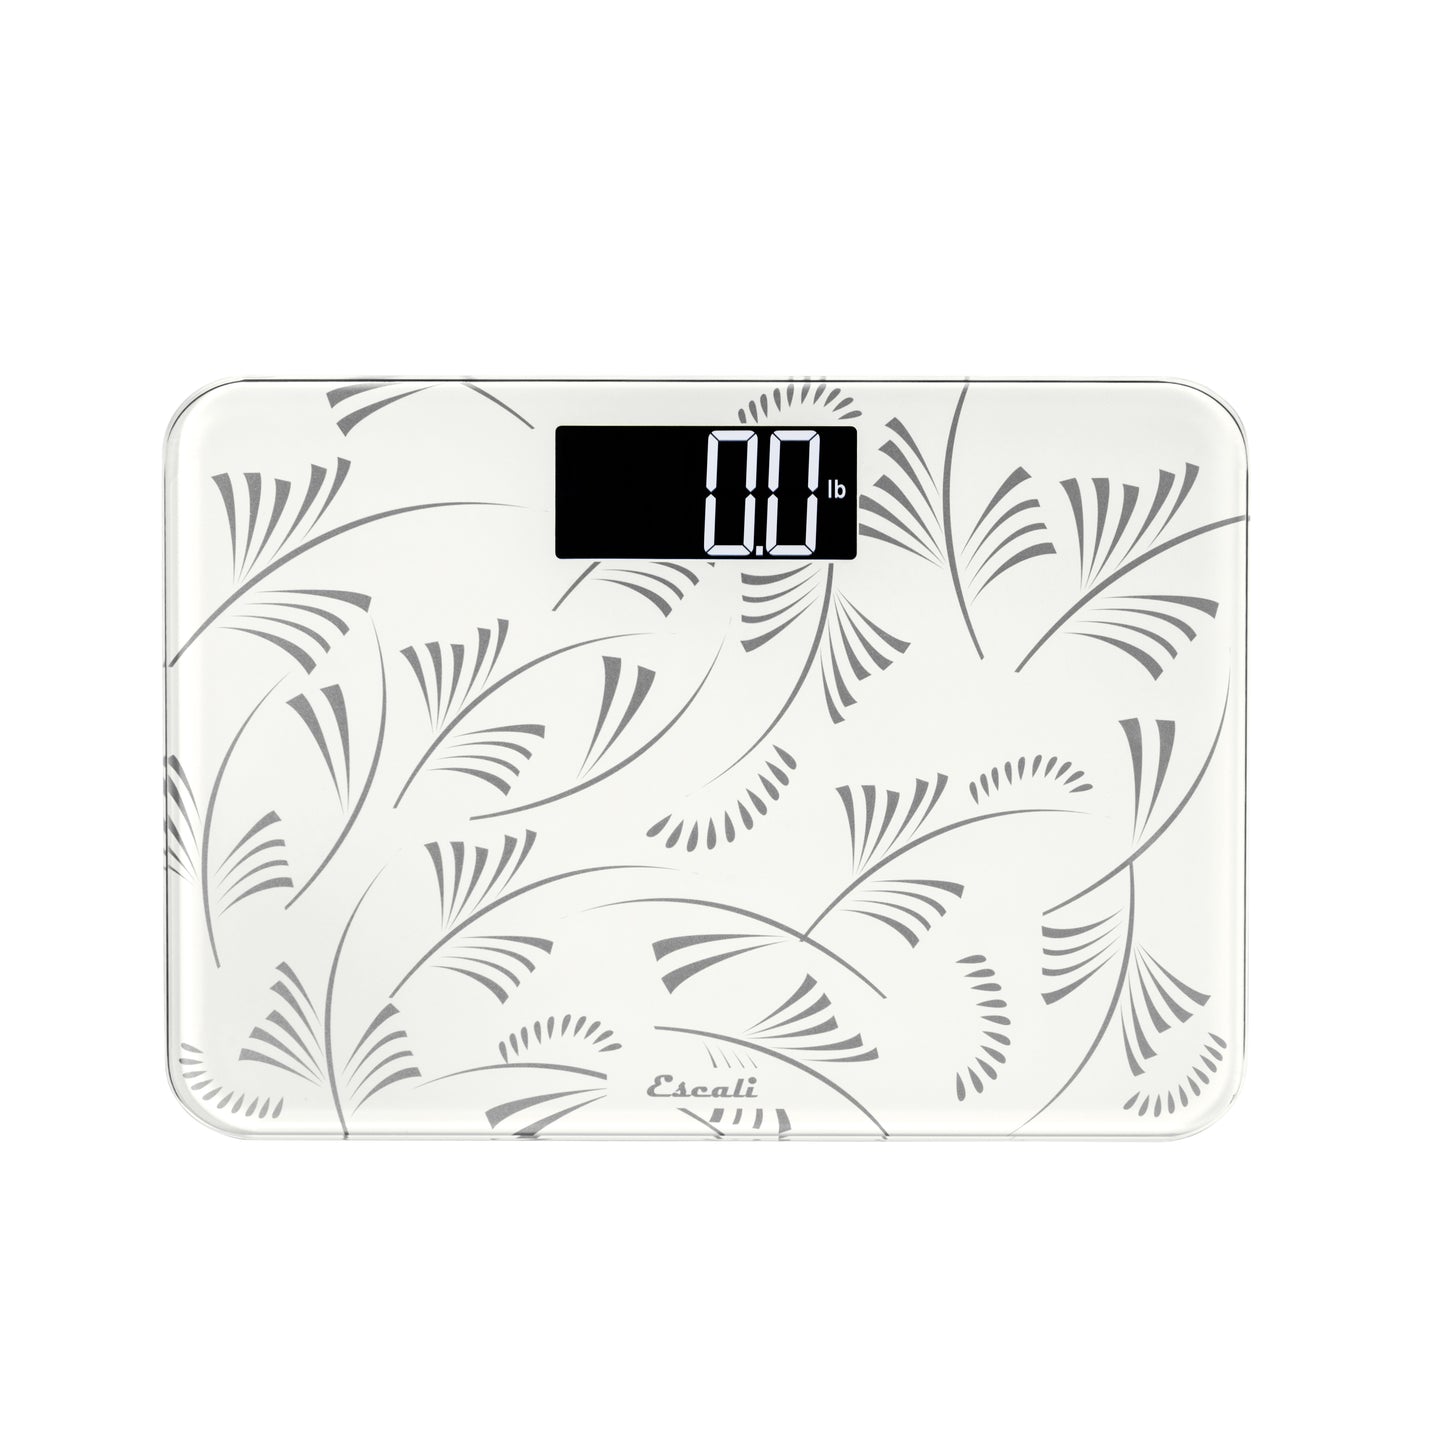 Compact Body Scale